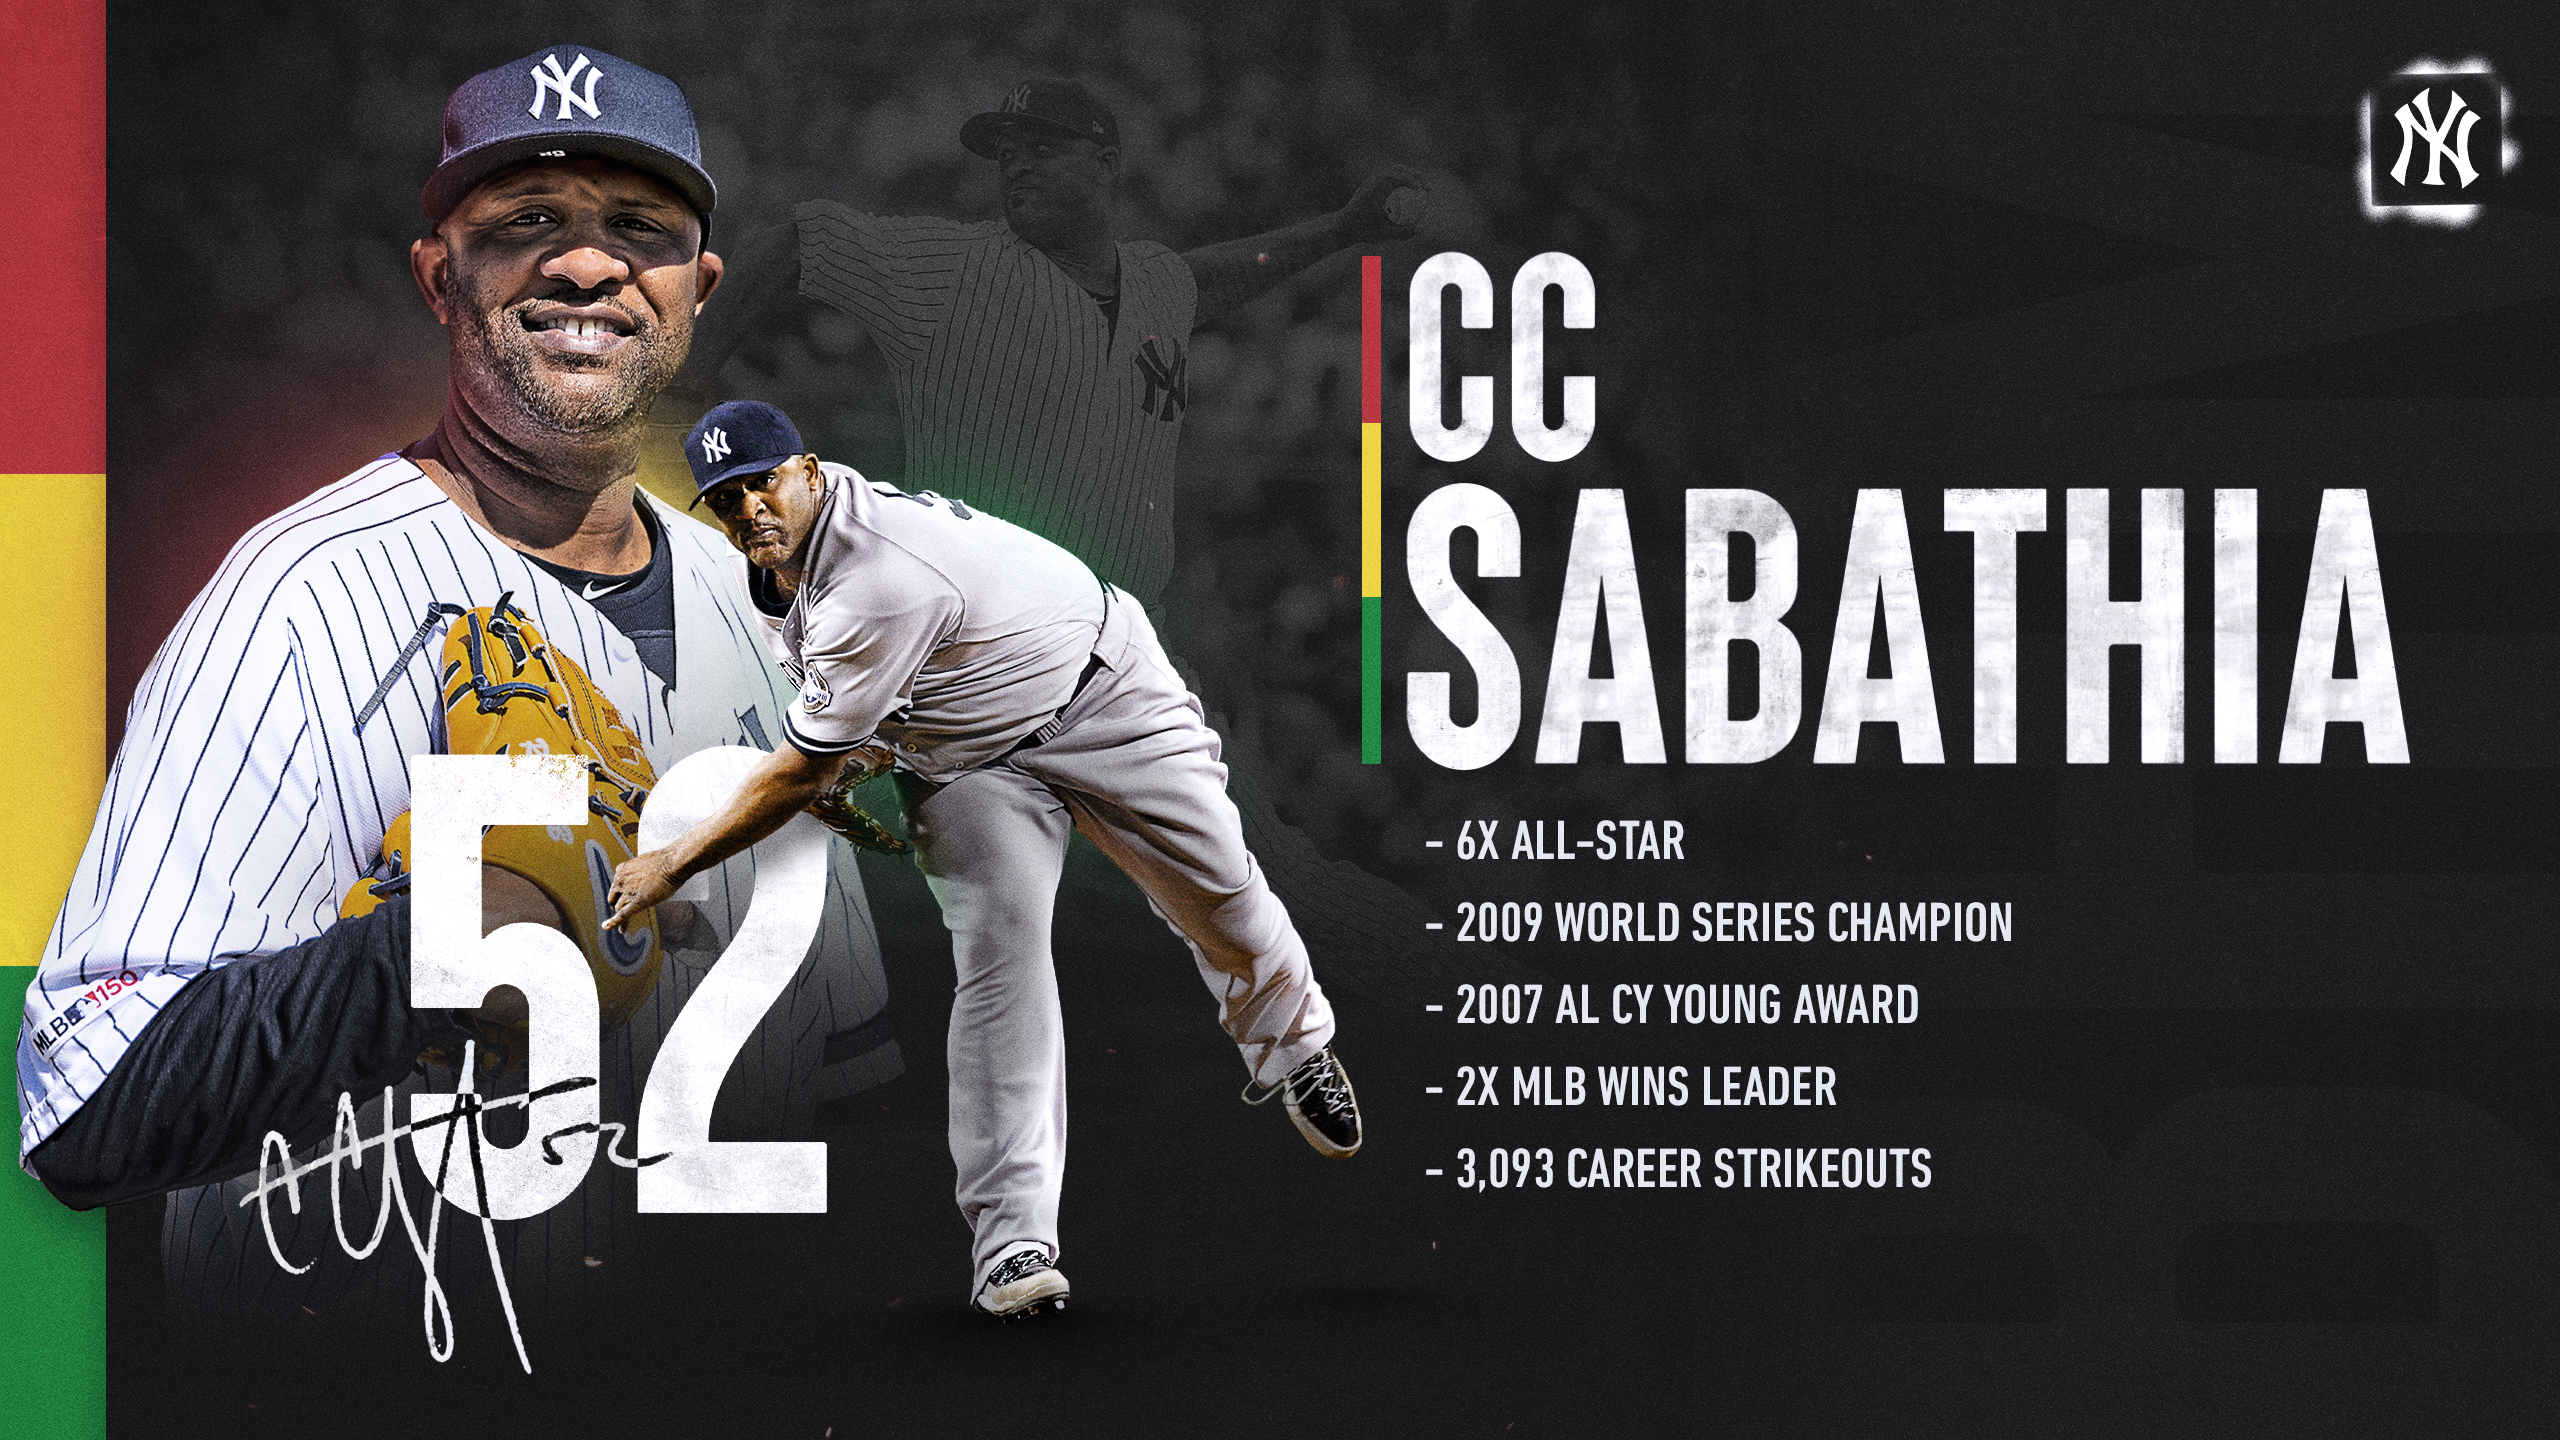 New York Yankees on X: For our final player feature of #BlackHistoryMonth,  we look at the career highlights of the big lefty, @CC_Sabathia 👏 Off the  field, CC and his wife Amber